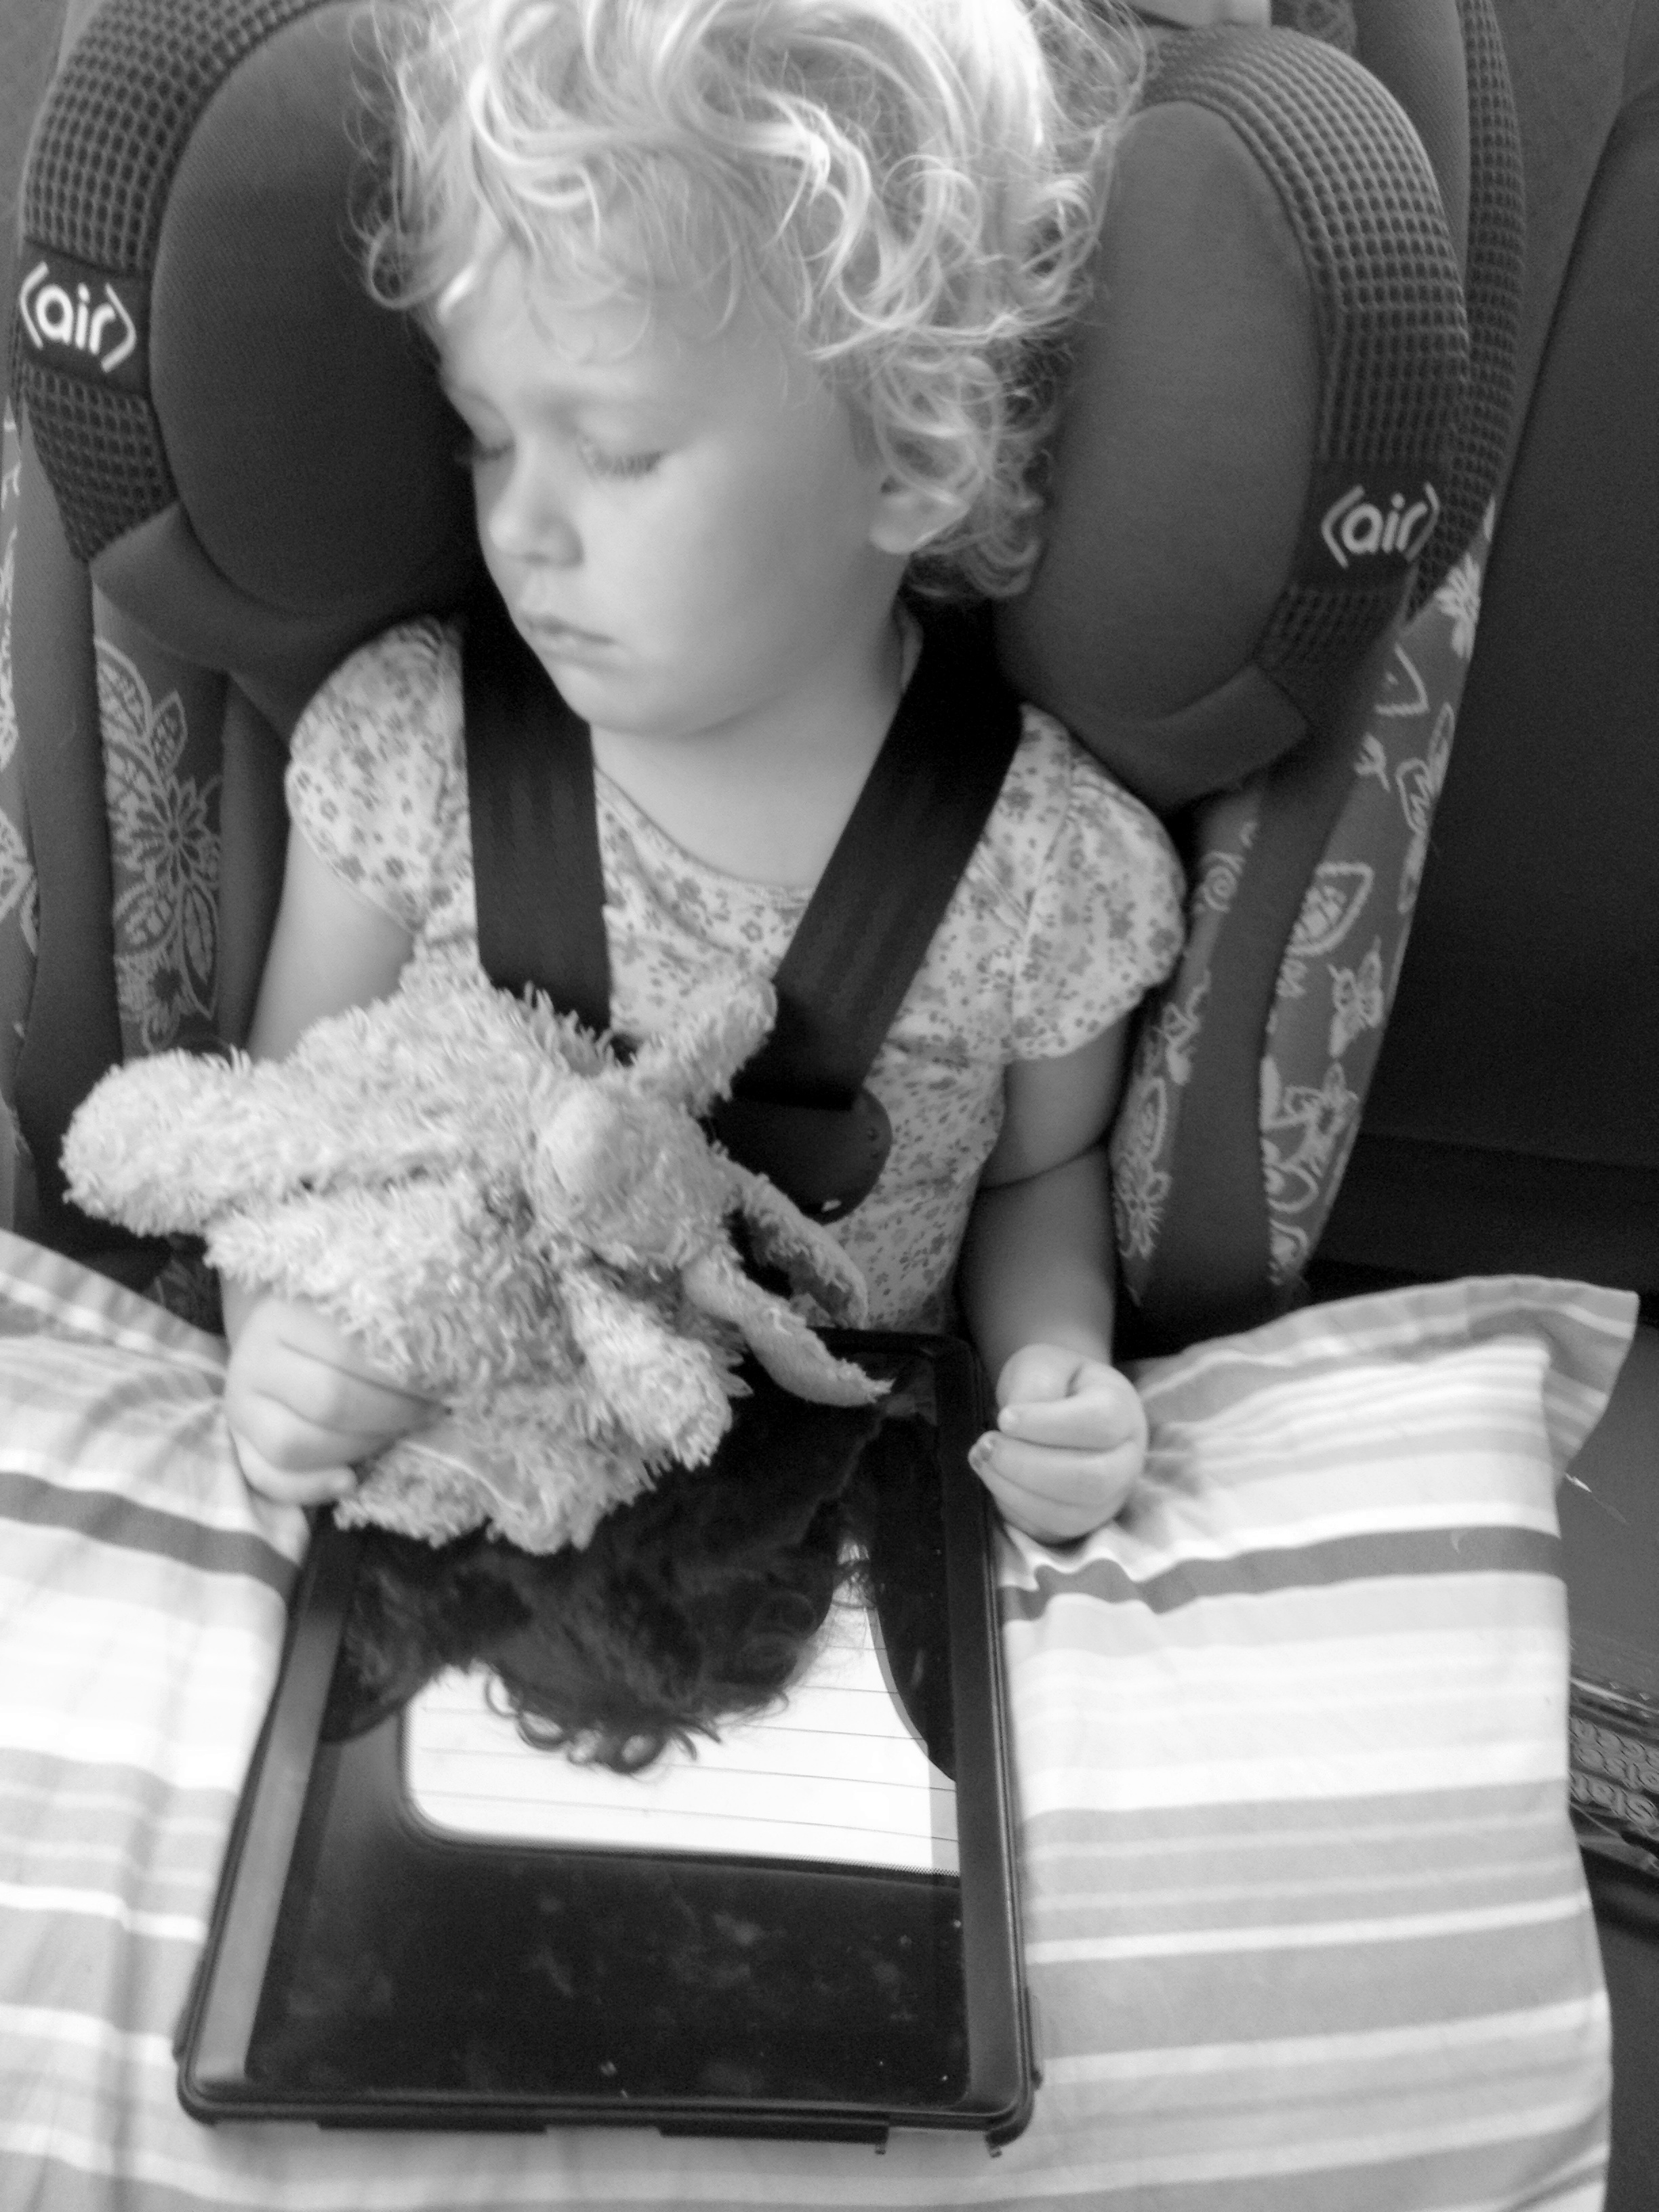 Rules Of The Road - A Trip With The iPad - iPad Kids